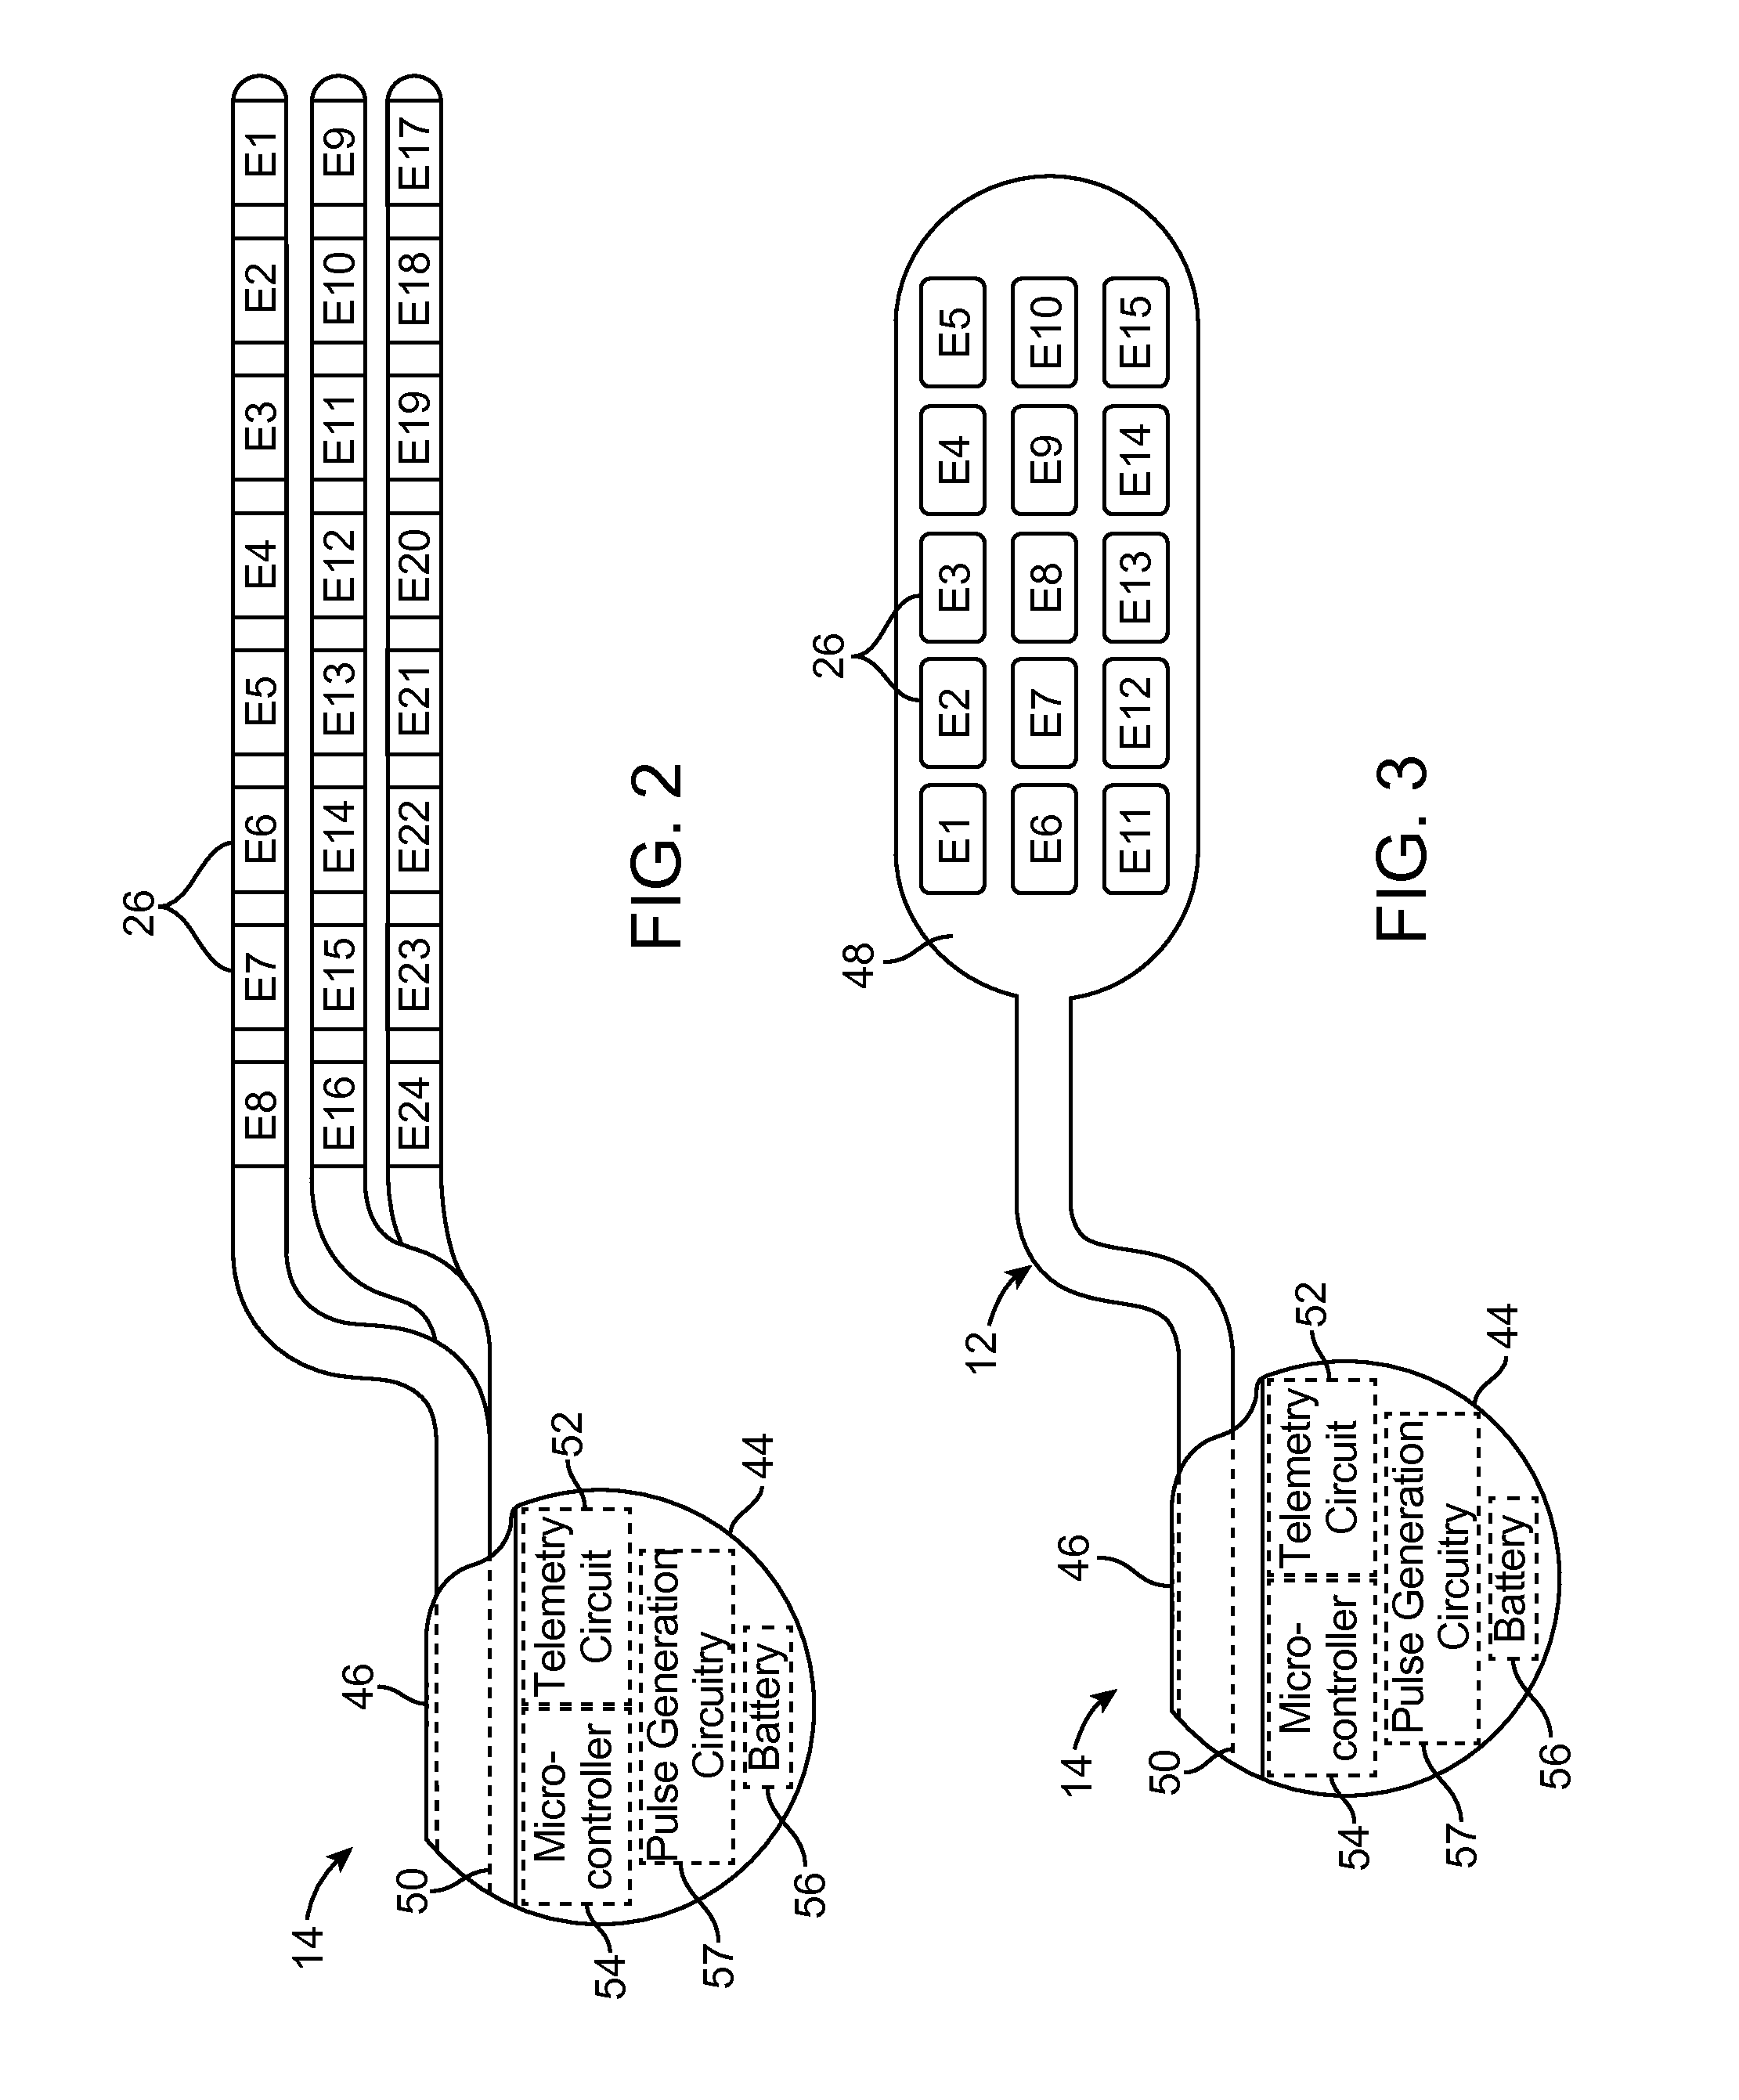 Method for treating hypertension via electrical stimulation of neural structures